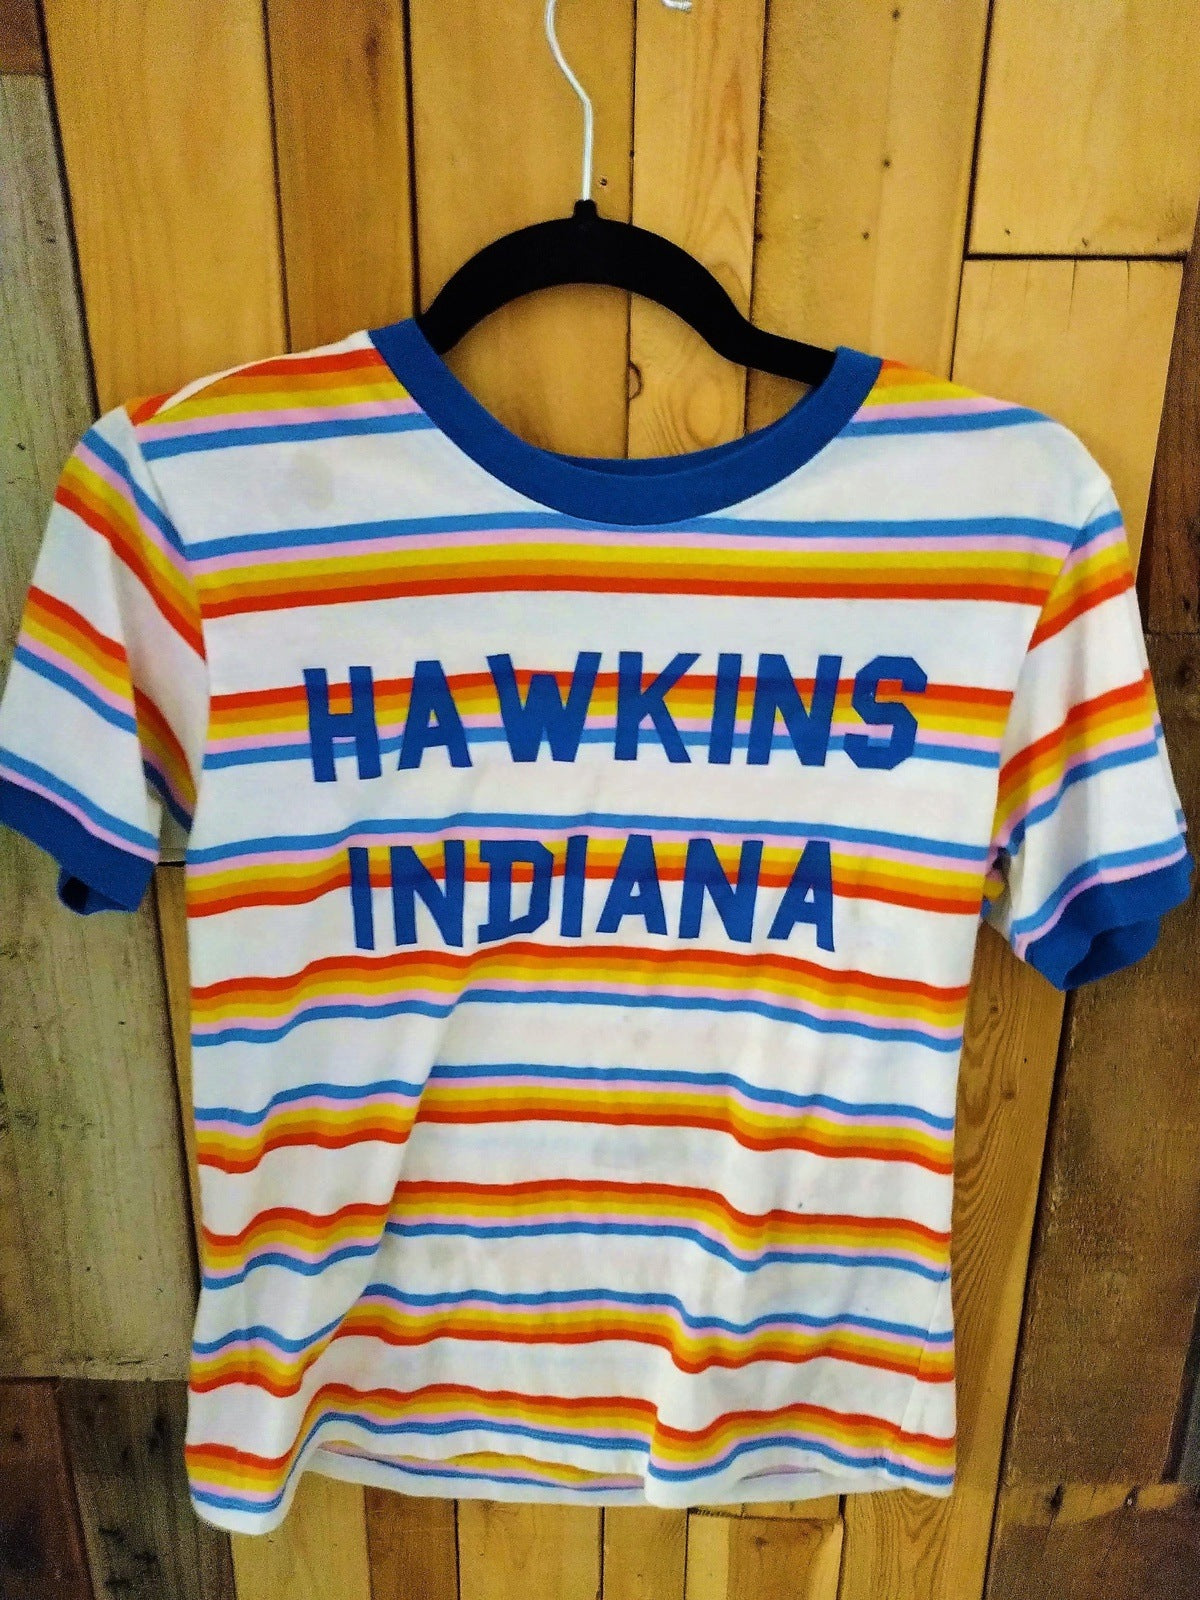 Stranger Things Official Merchandise "Hawkins Indiana" T Shirt Size Small